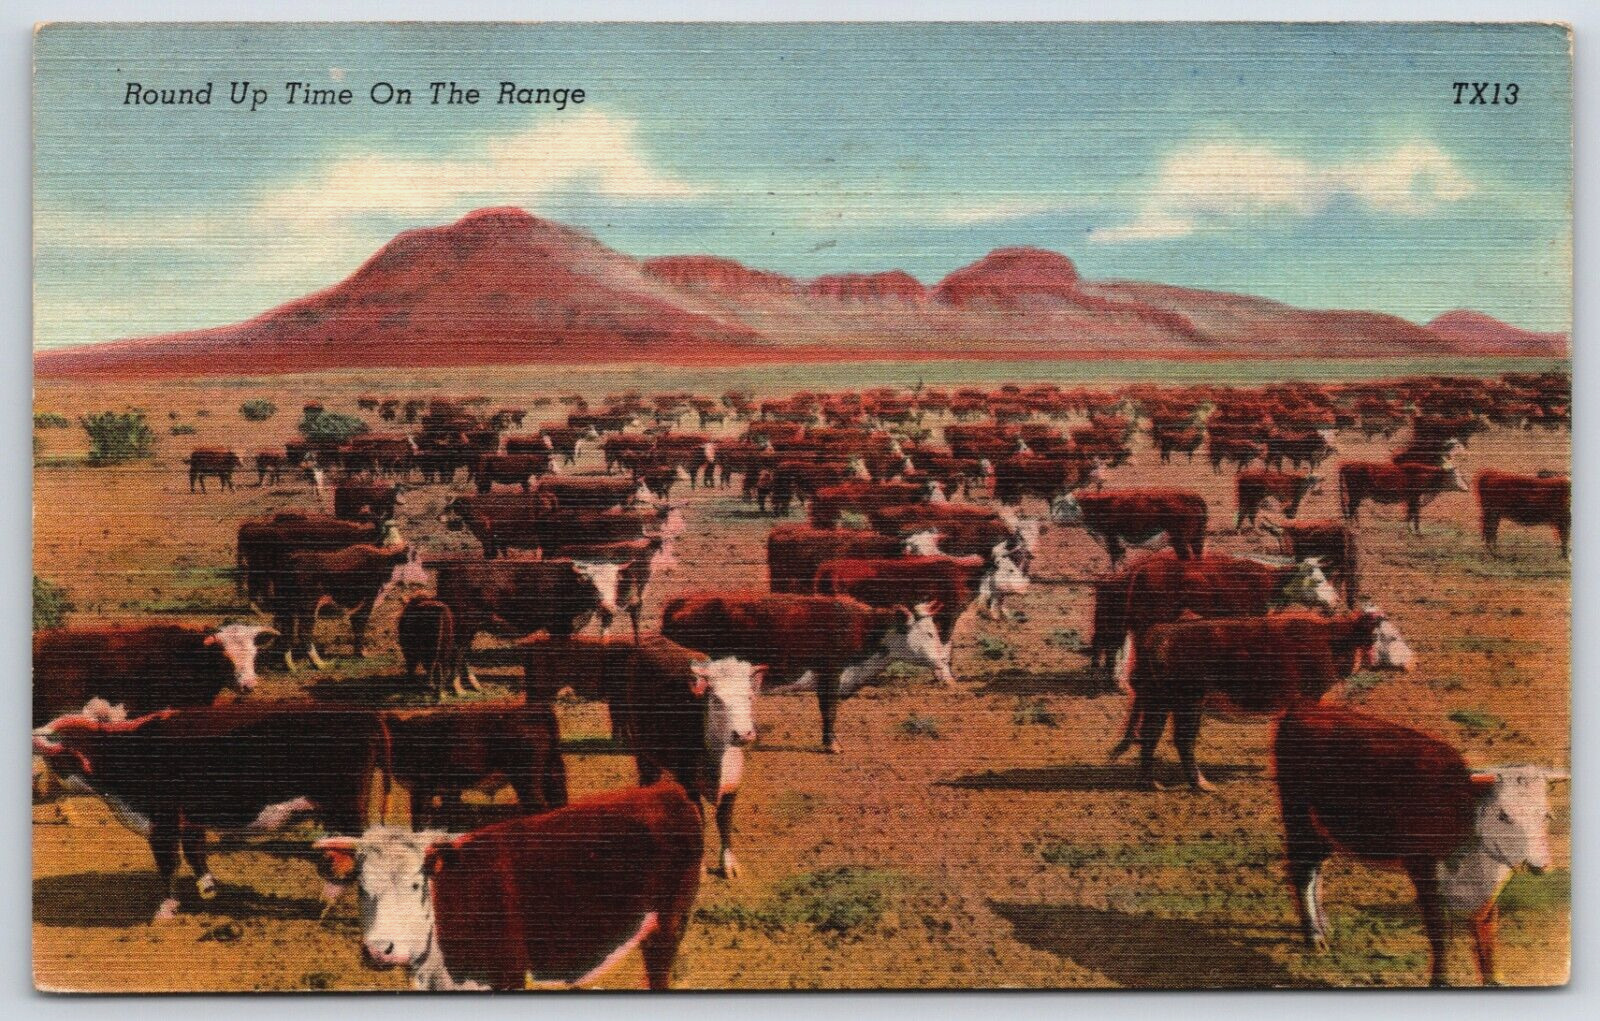 Postcard Round Up Time On The Range, White Face Herefords, Posted 1945